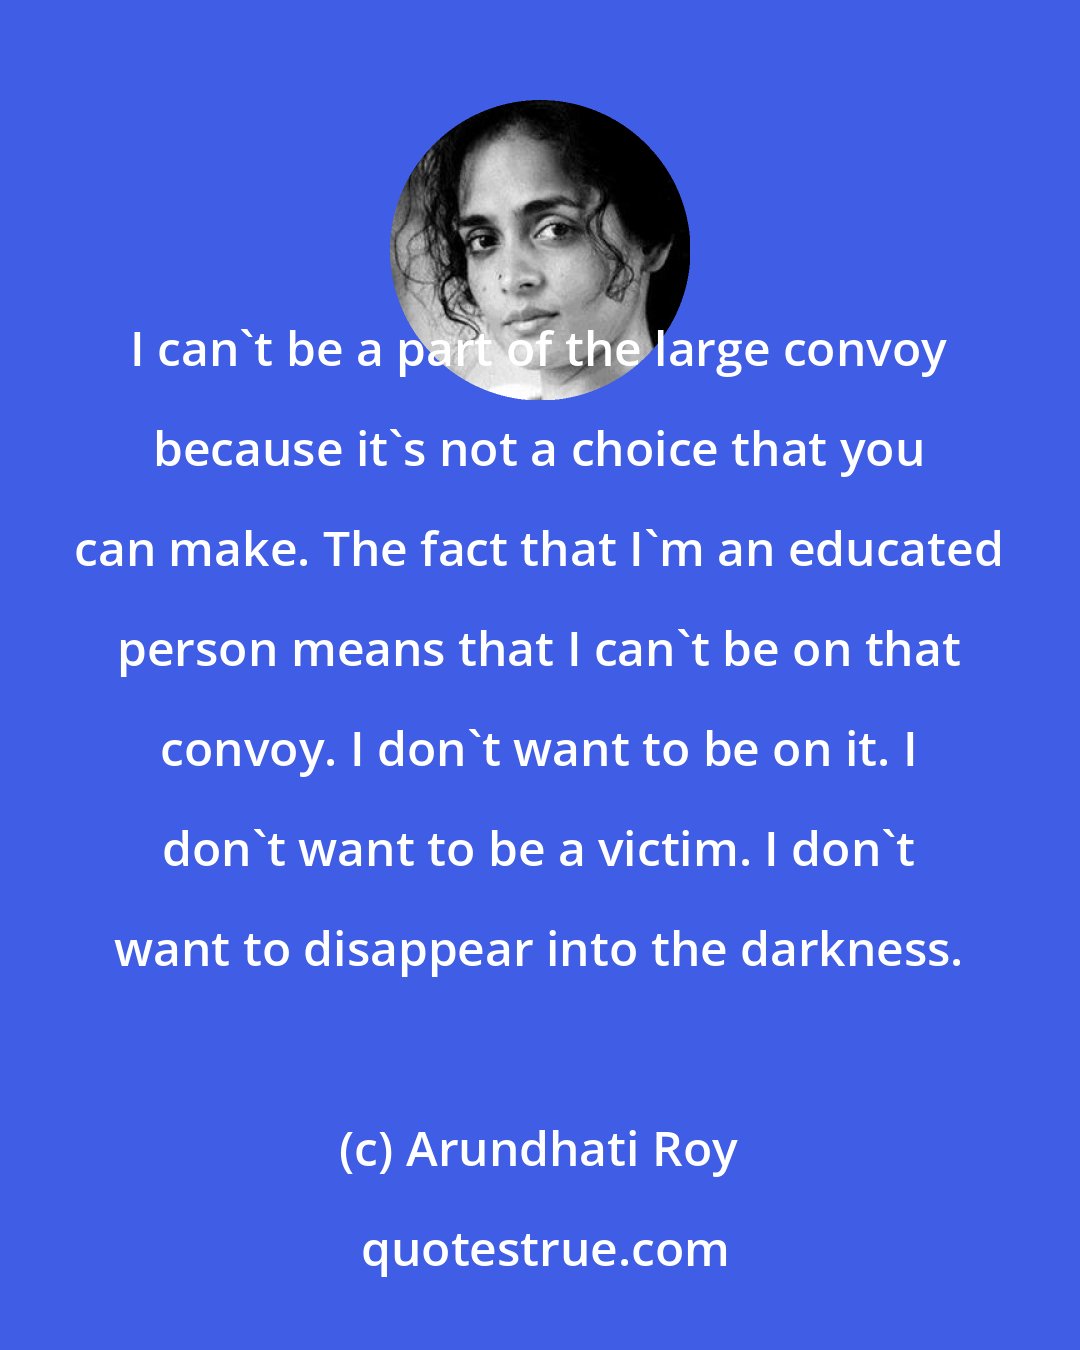 Arundhati Roy: I can't be a part of the large convoy because it's not a choice that you can make. The fact that I'm an educated person means that I can't be on that convoy. I don't want to be on it. I don't want to be a victim. I don't want to disappear into the darkness.